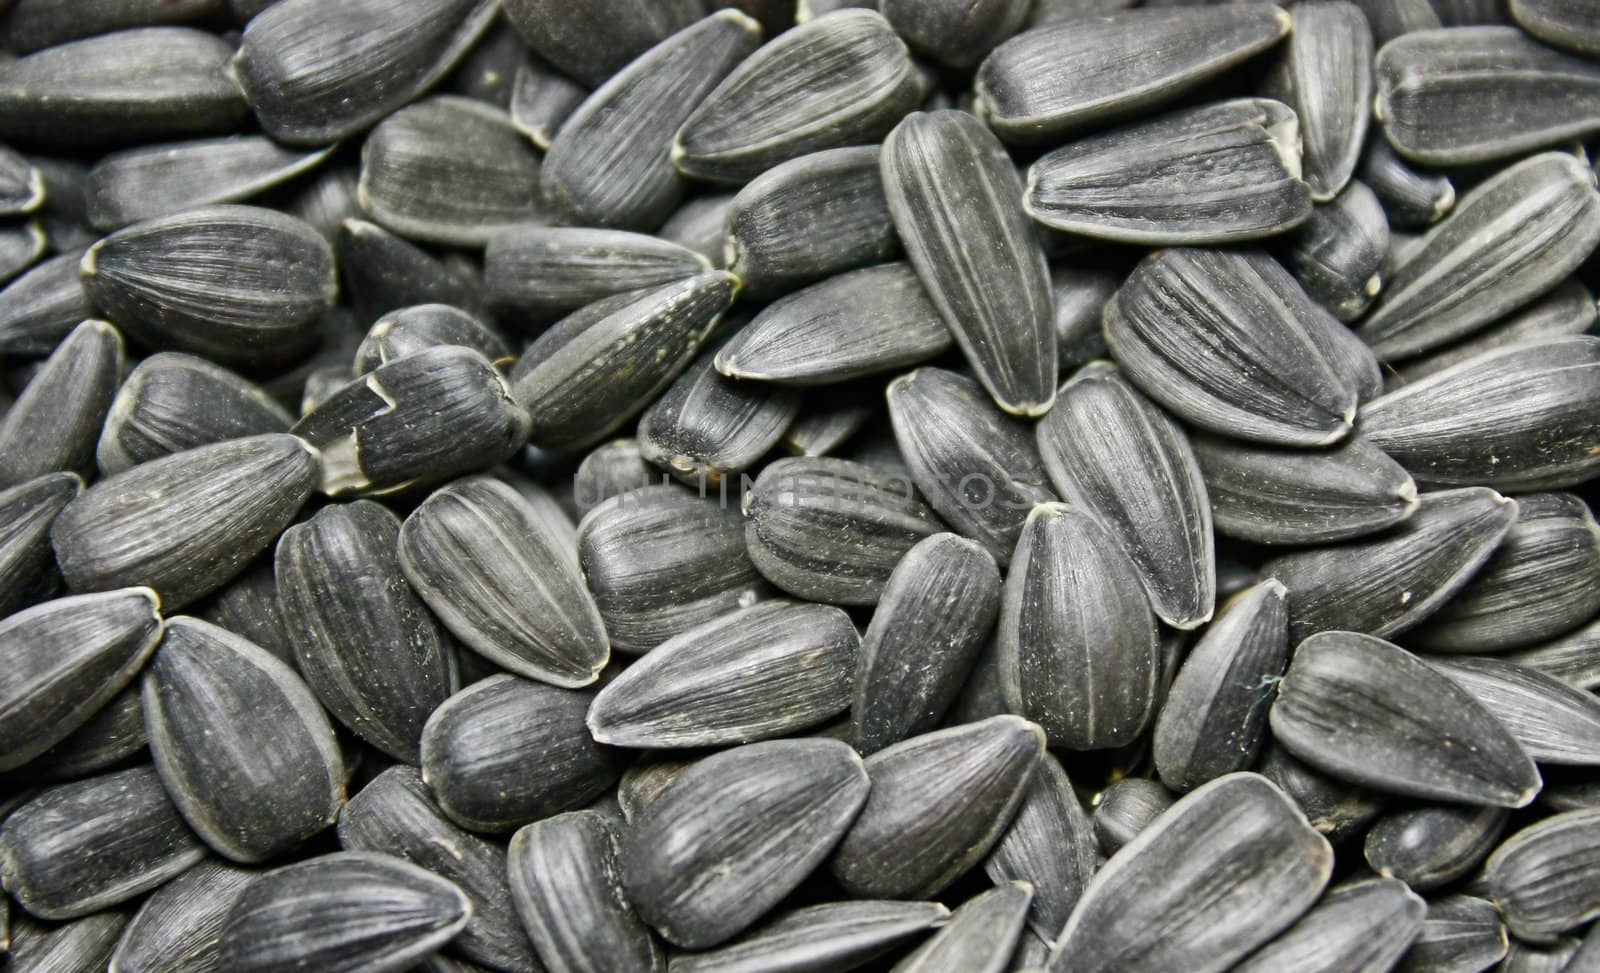 It is a lot of sunflower seeds.They are scattered on a table. They very tasty. Many people love sunflower seeds.